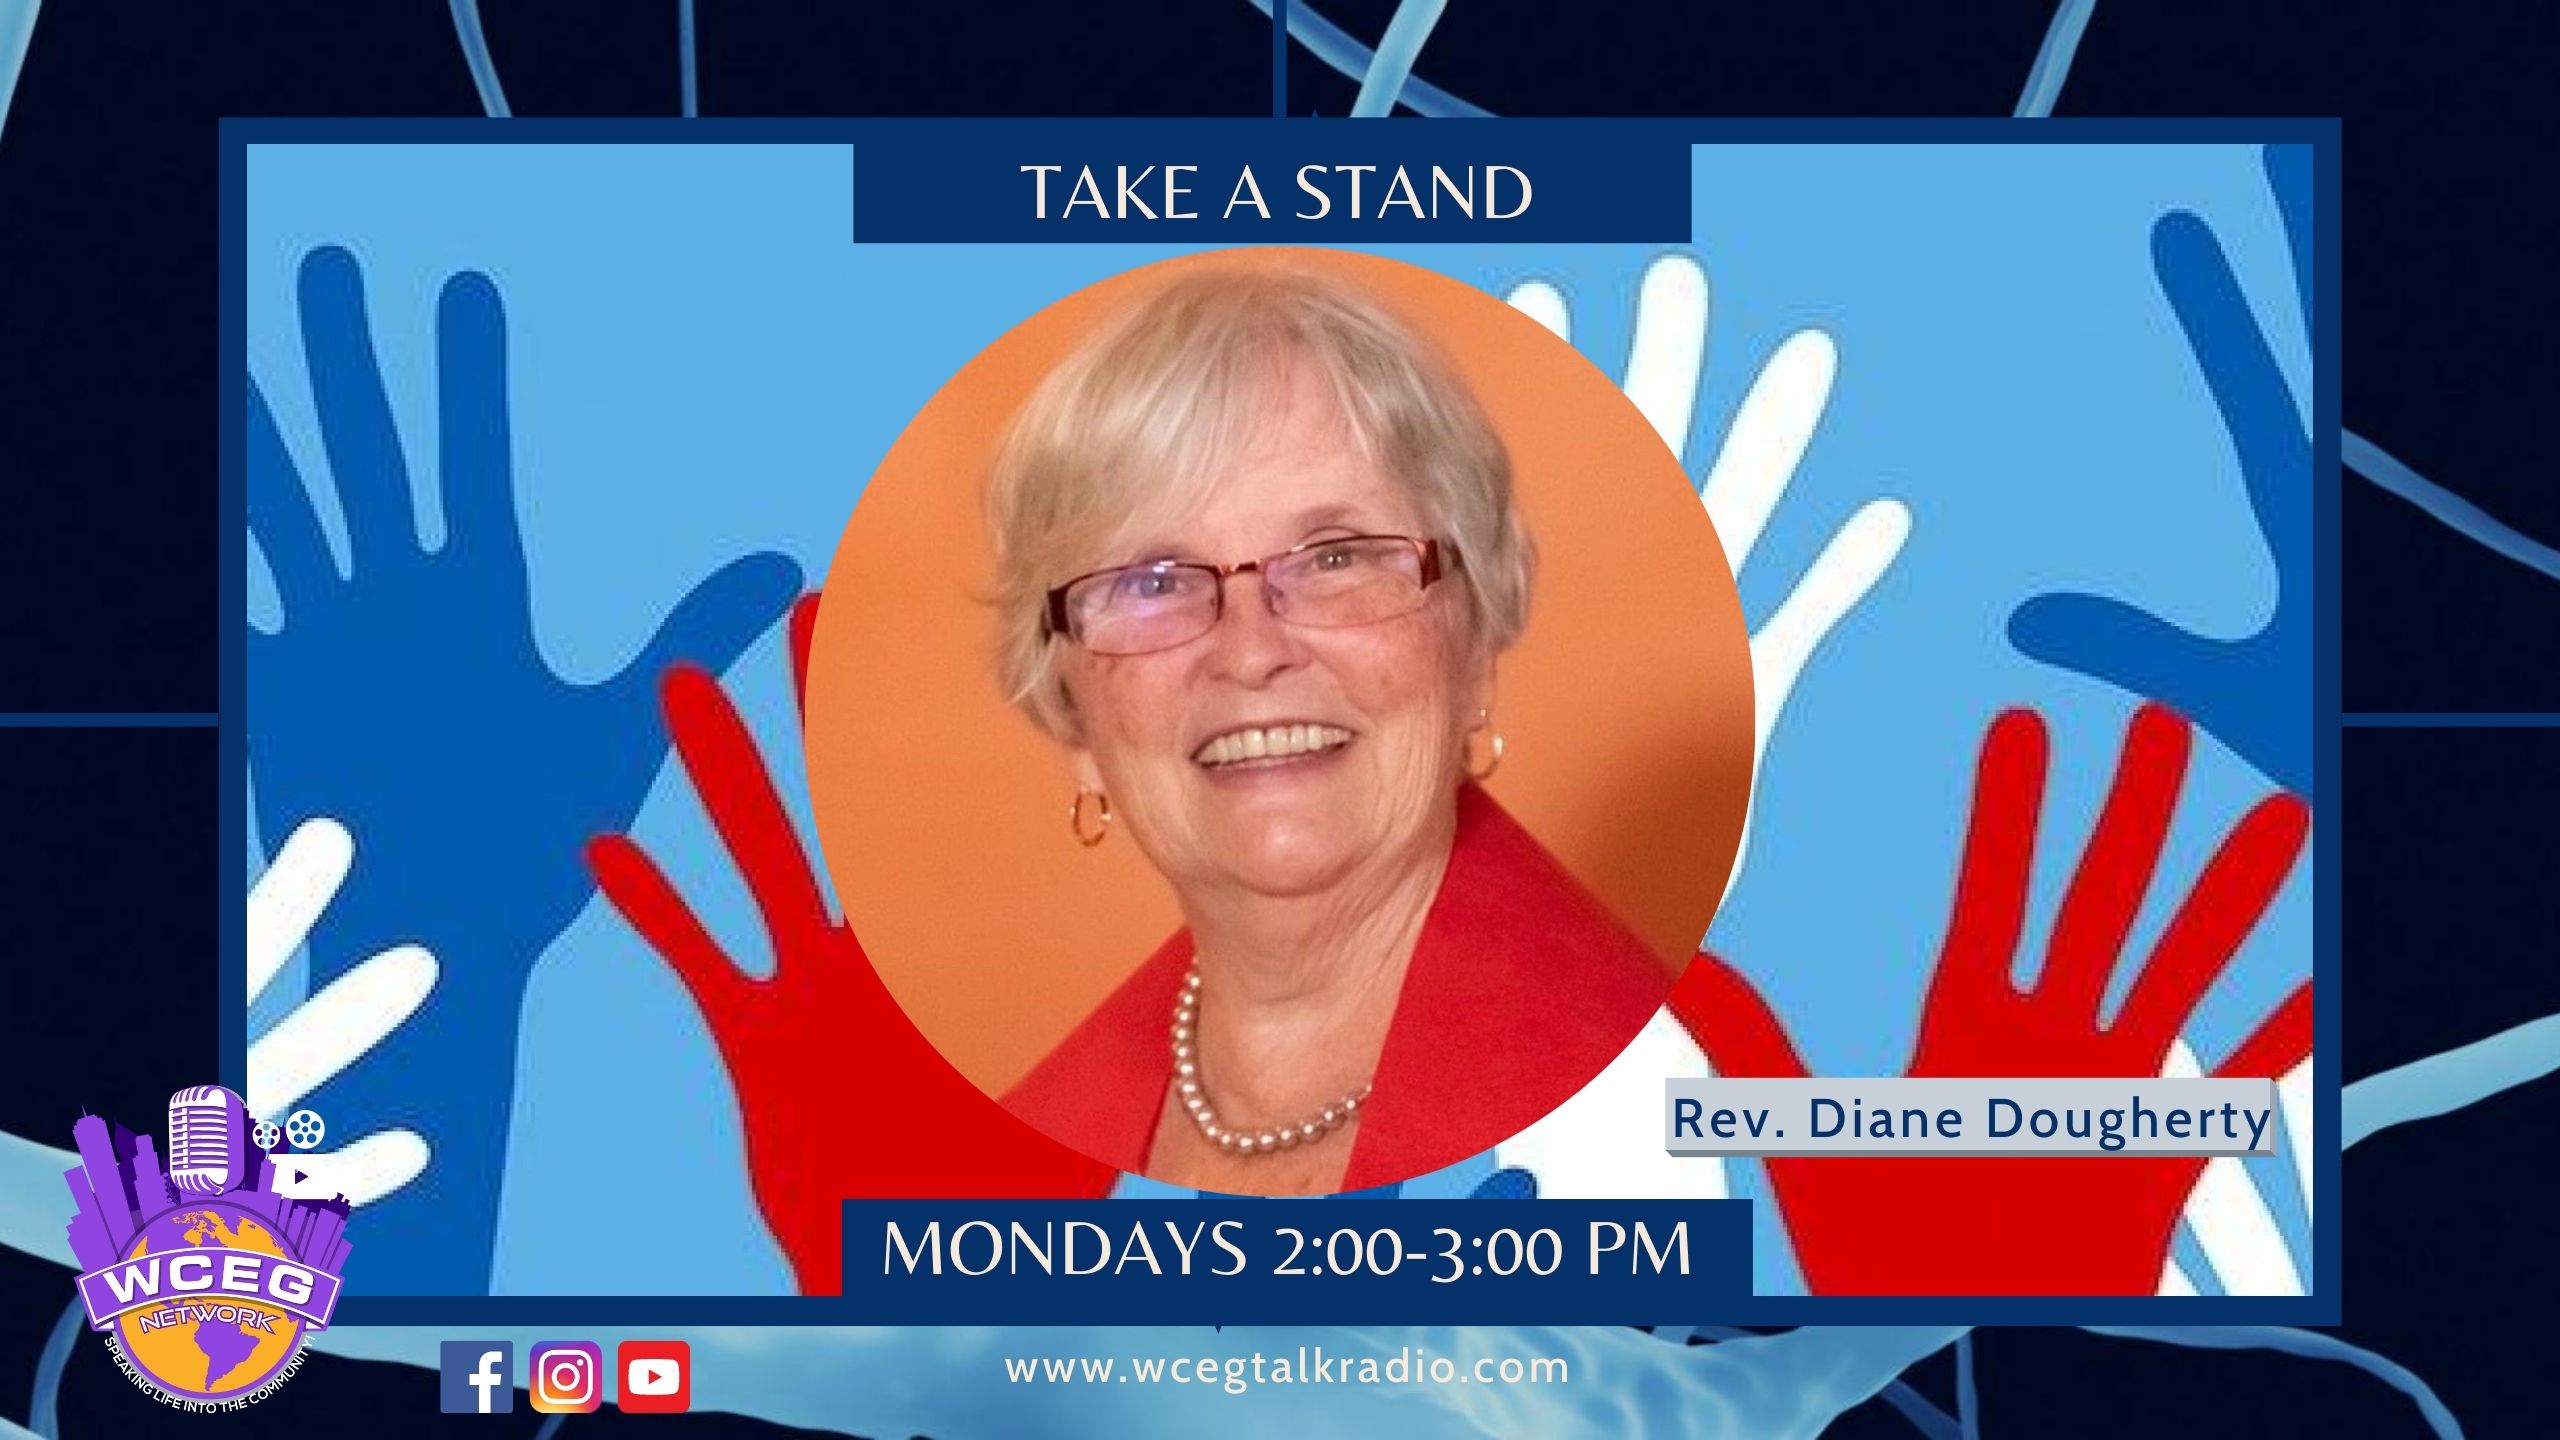 Take A Stand with Rev. Diane Dougherty